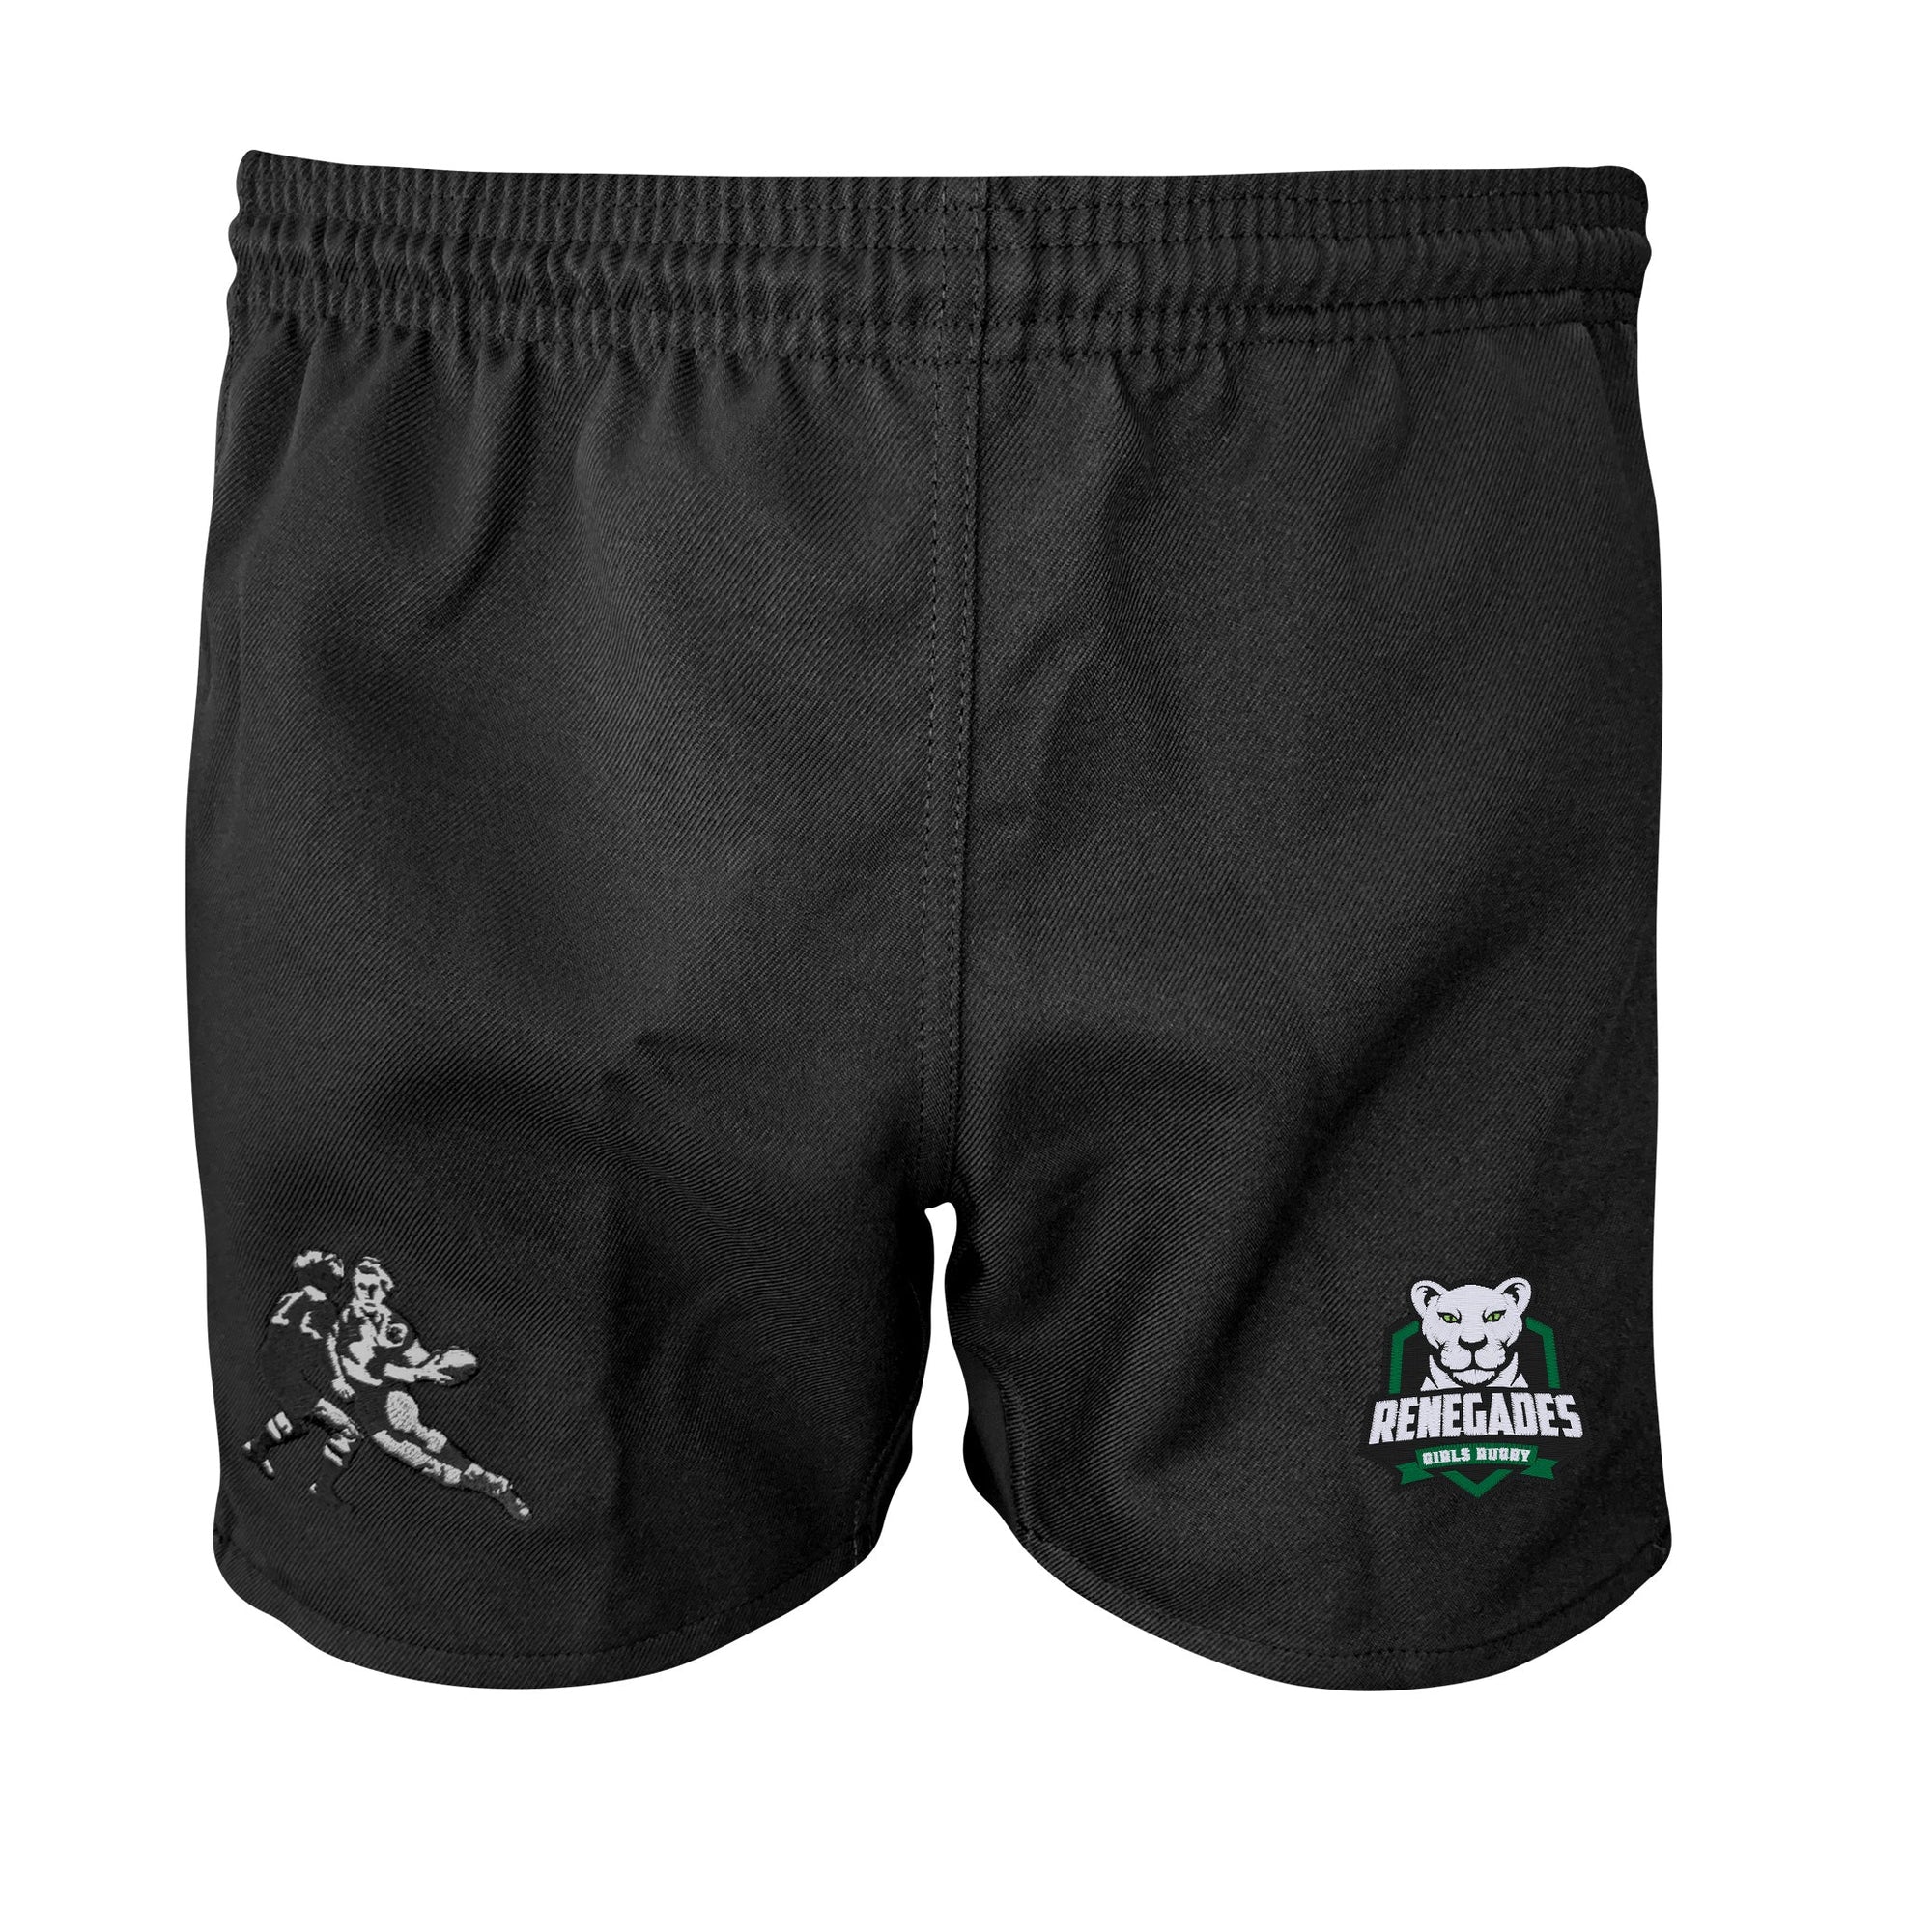 Rugby Imports Renegades RI Pro Power Shorts